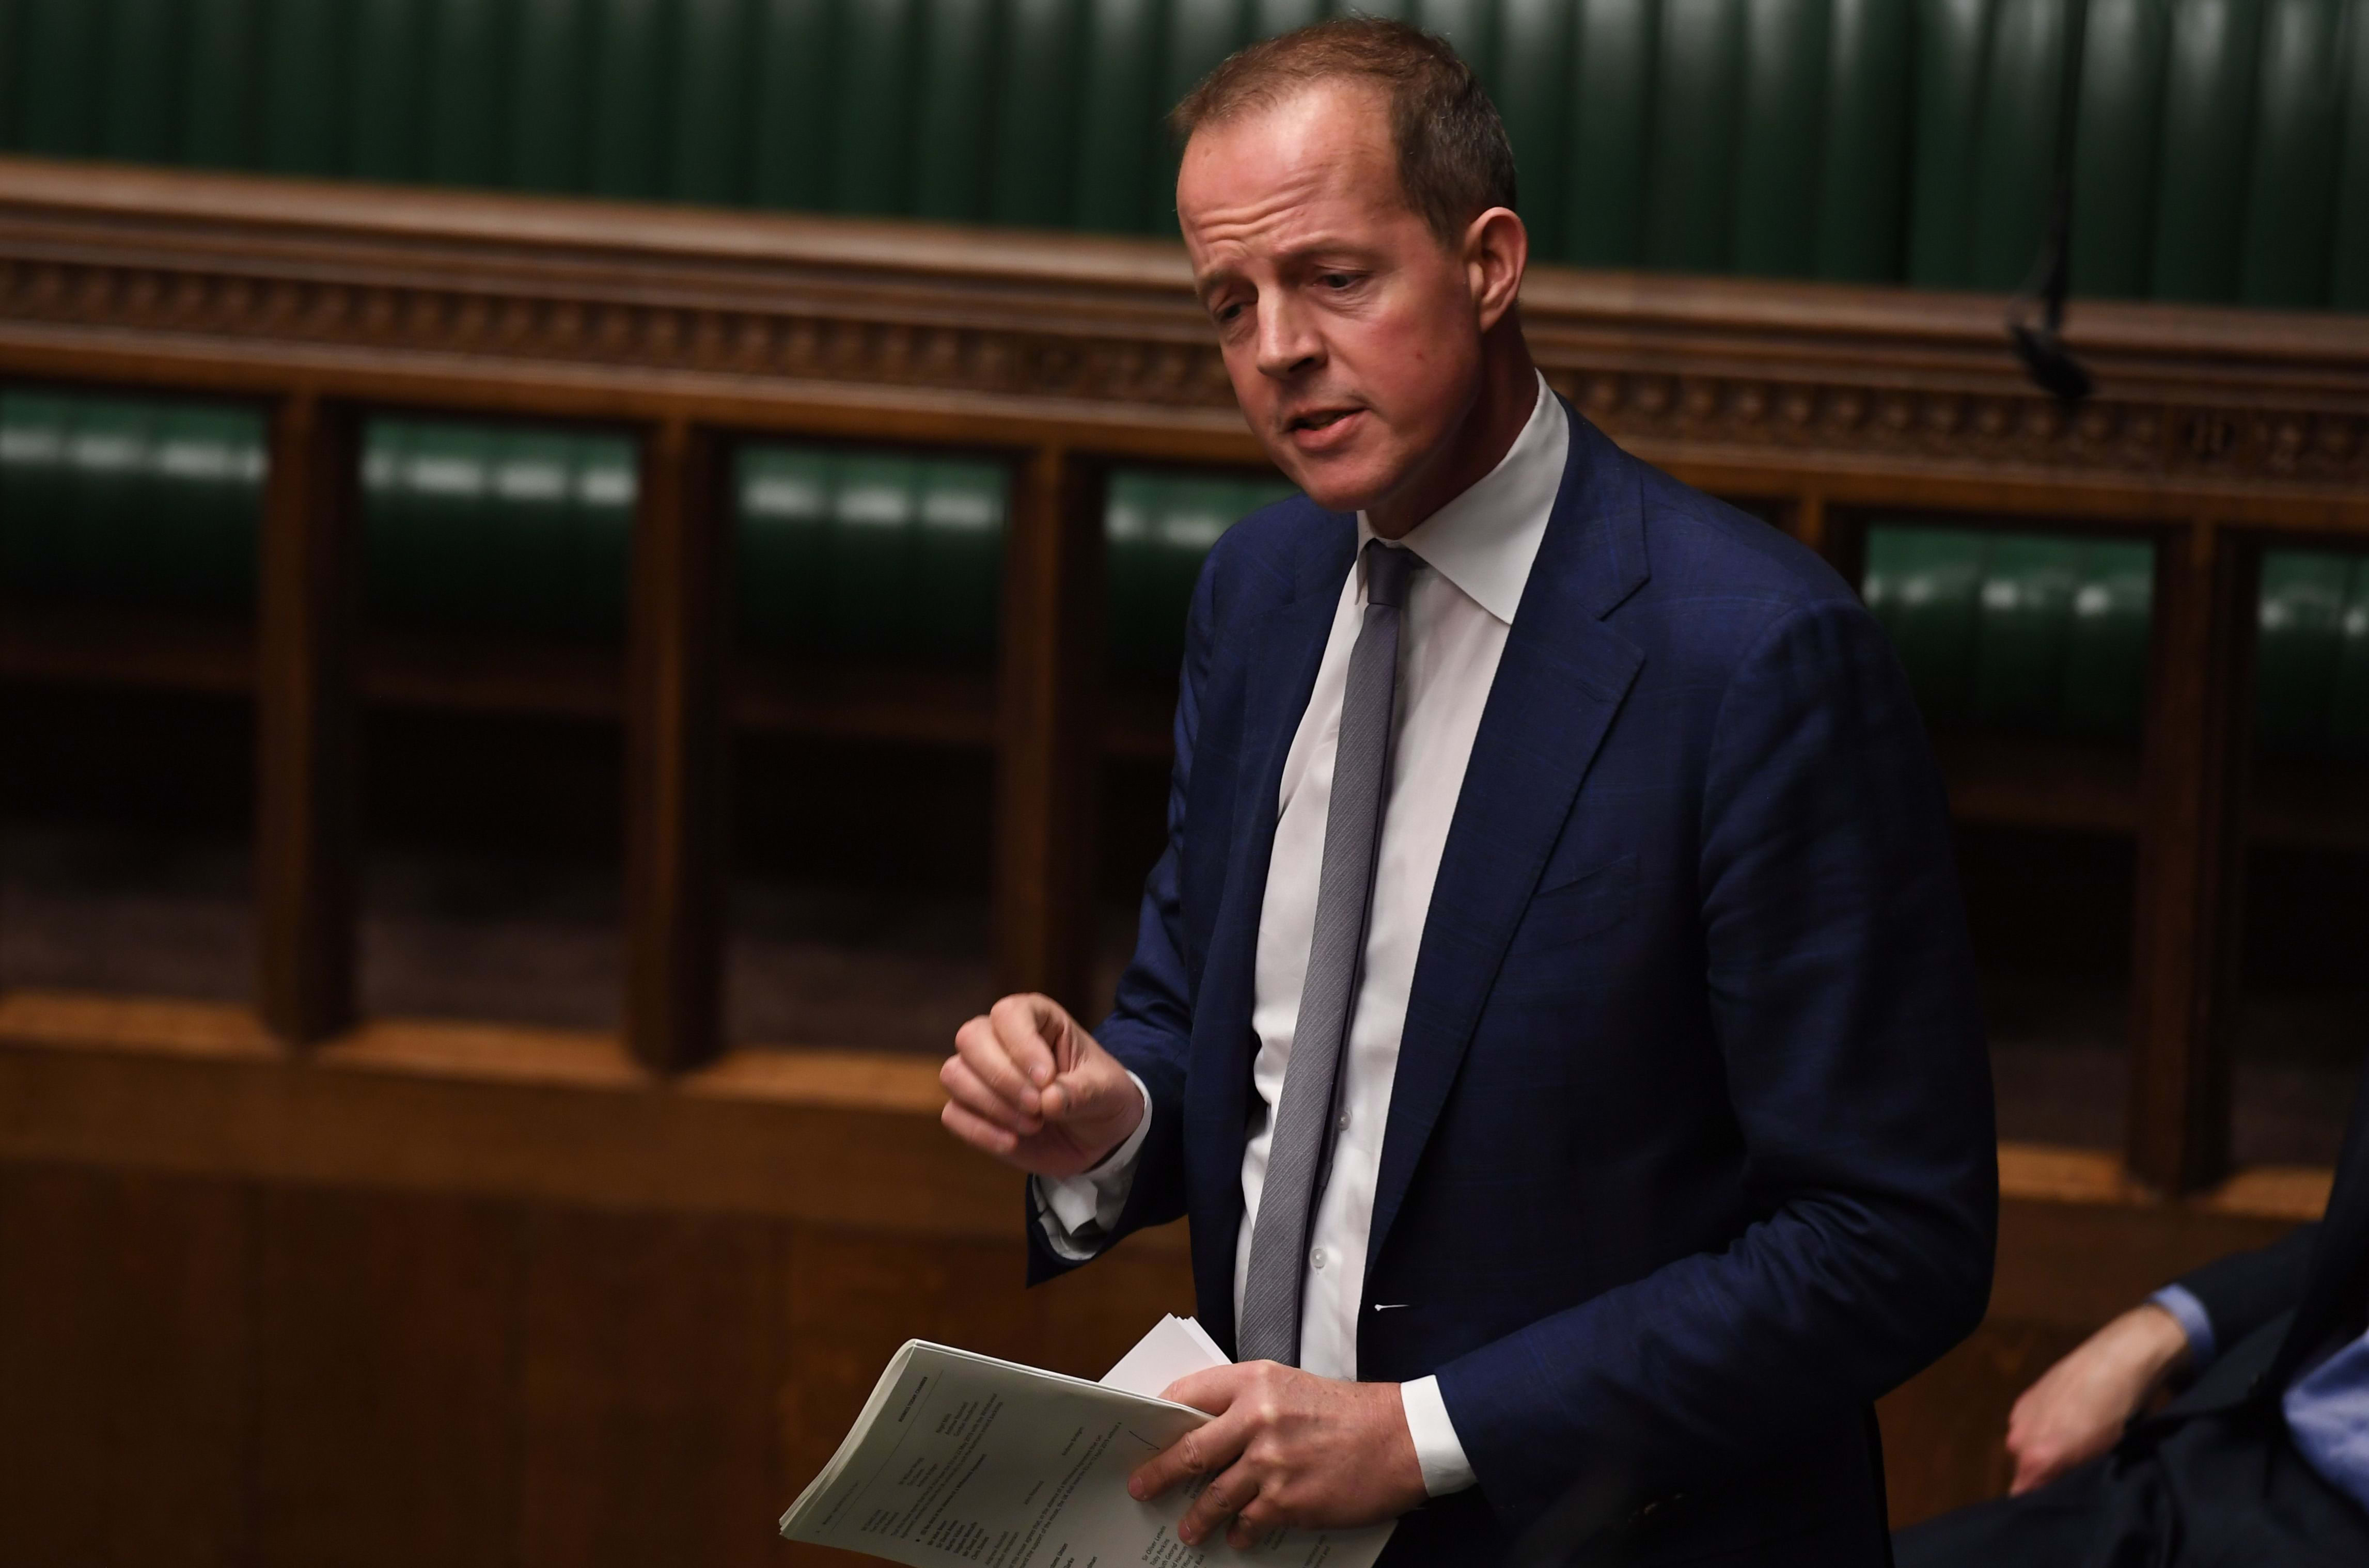 A handout photograph taken and released by the UK Parliament on April, 1 2019 shows Conservative MP Nick Boles speaking during a debate in the House of Commons.